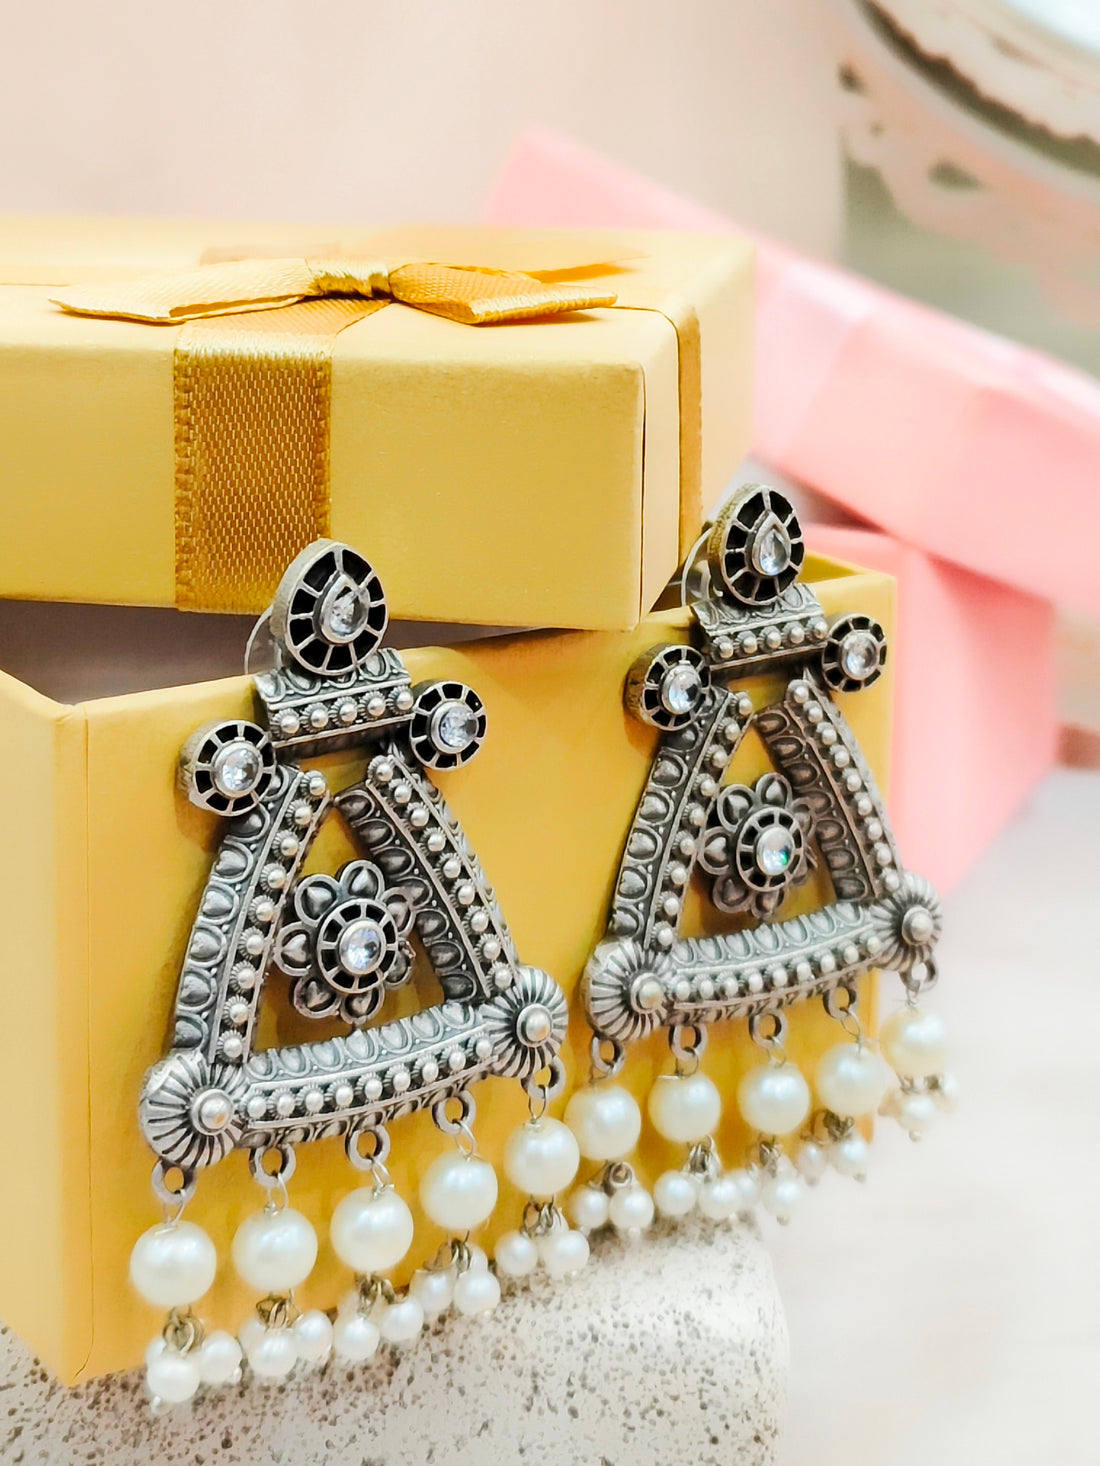 Mandana Antique Finish Earrings from Mrigaya by Nandini for Festive Occasions & Traditional Look | Indian Ethnic Look - Mrigaya India